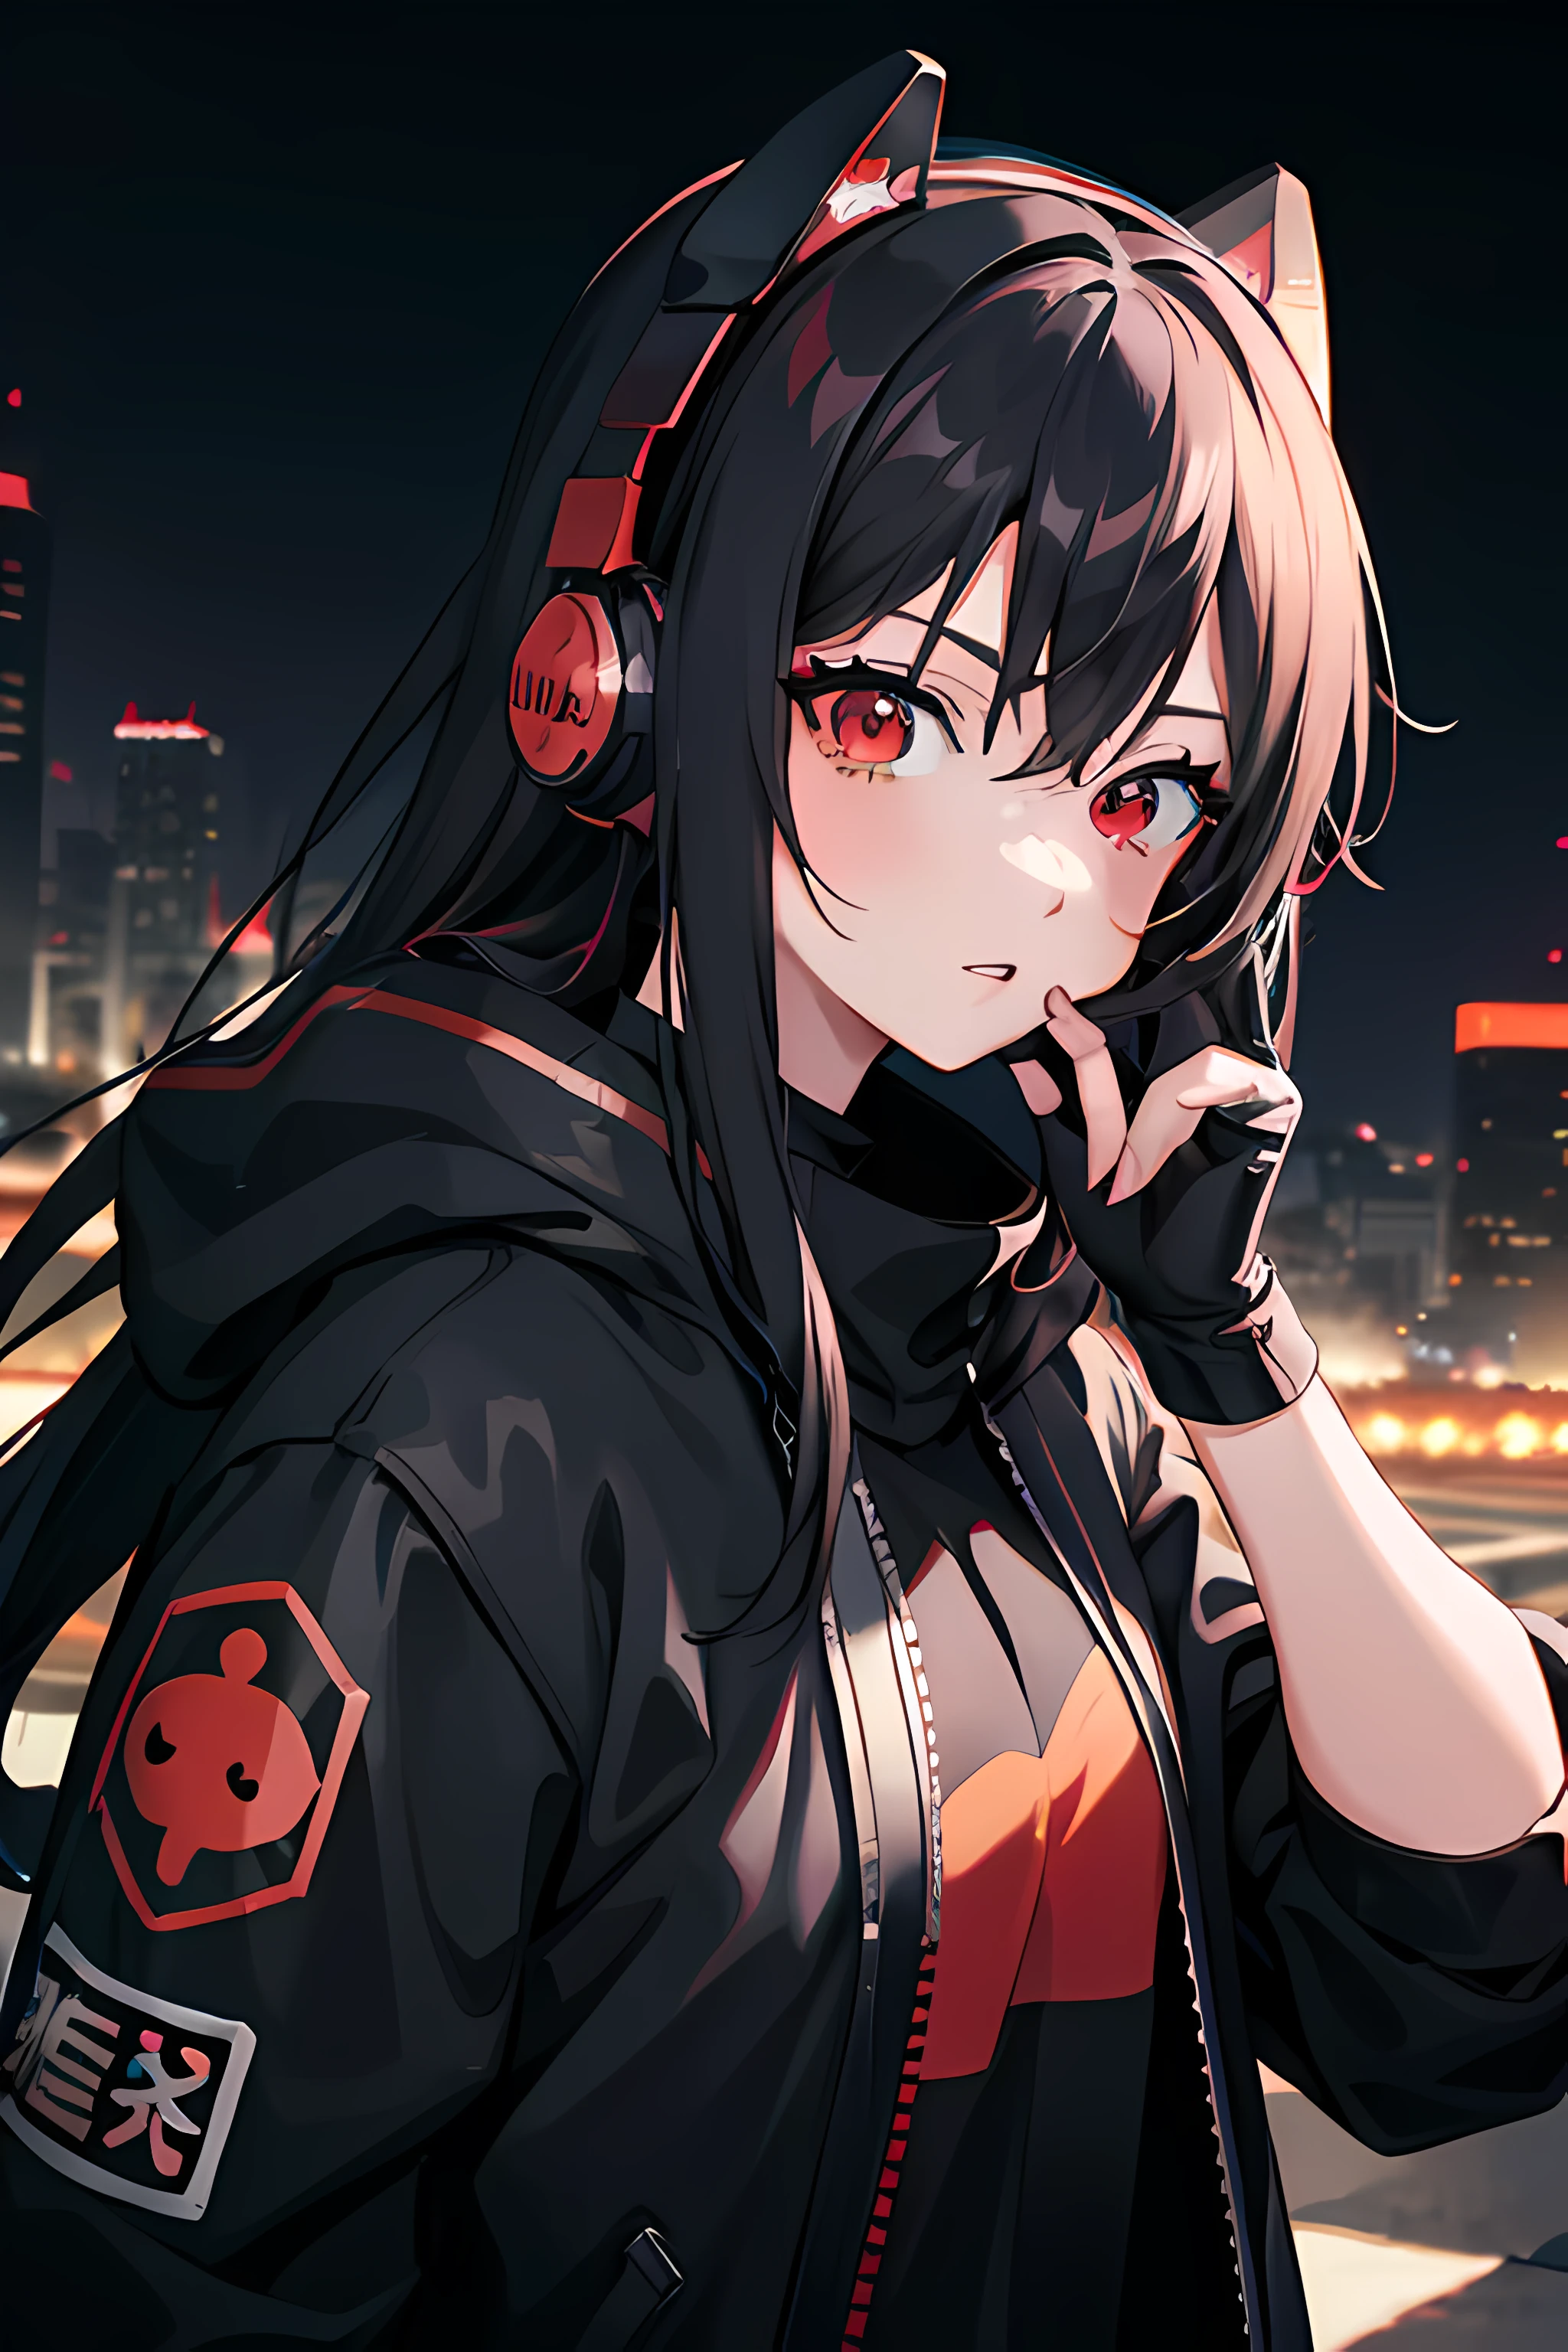 Anime Girl Character with Red Eyes, Headphones and black clothing with red accents. in a room, Best Anime Konachan 4K Wallpaper, Anime-Stil 4 K, Cyberpunk anime girl in hoodie, anime art wallpaper 8 k, anime art wallpaper 4 k, anime art wallpaper 4k, anime moe artstyle, 4k anime wallpaper, anime wallpaper 4 k, anime wallpaper 4k, 坏蛋动漫8 K